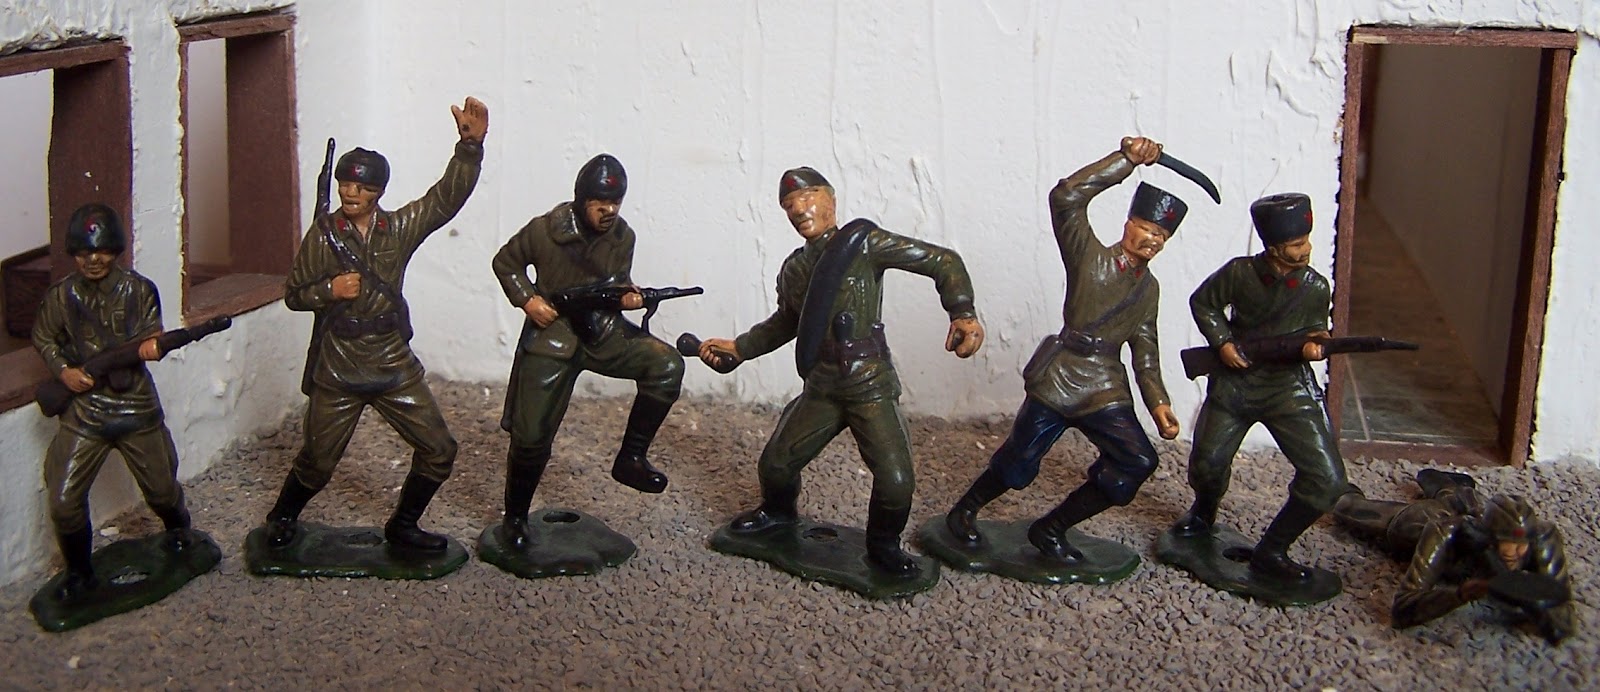 MPC Ringhand Soldier walking hands down 1960s Green plastic 